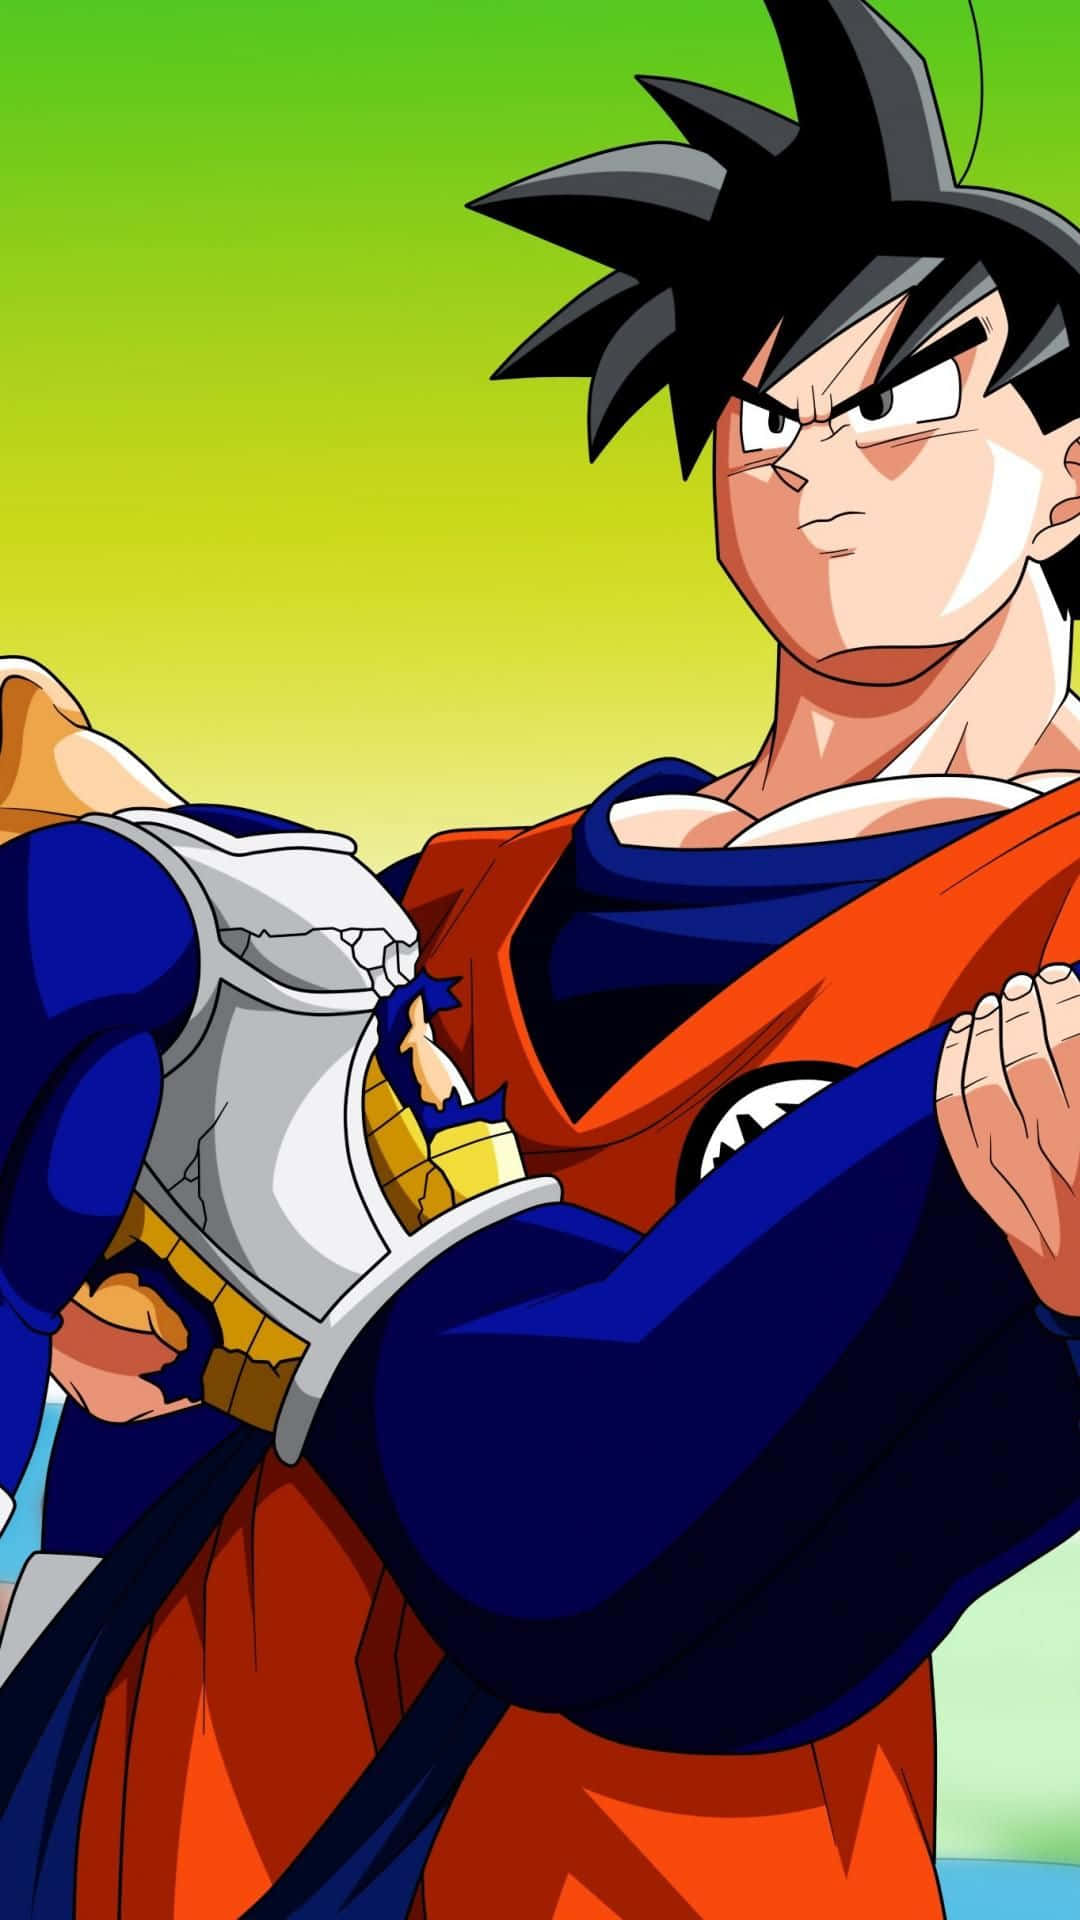 Harness the power of dragon balls with the latest iPhone featuring Dragon Ball Super's Goku and Vegeta. Wallpaper